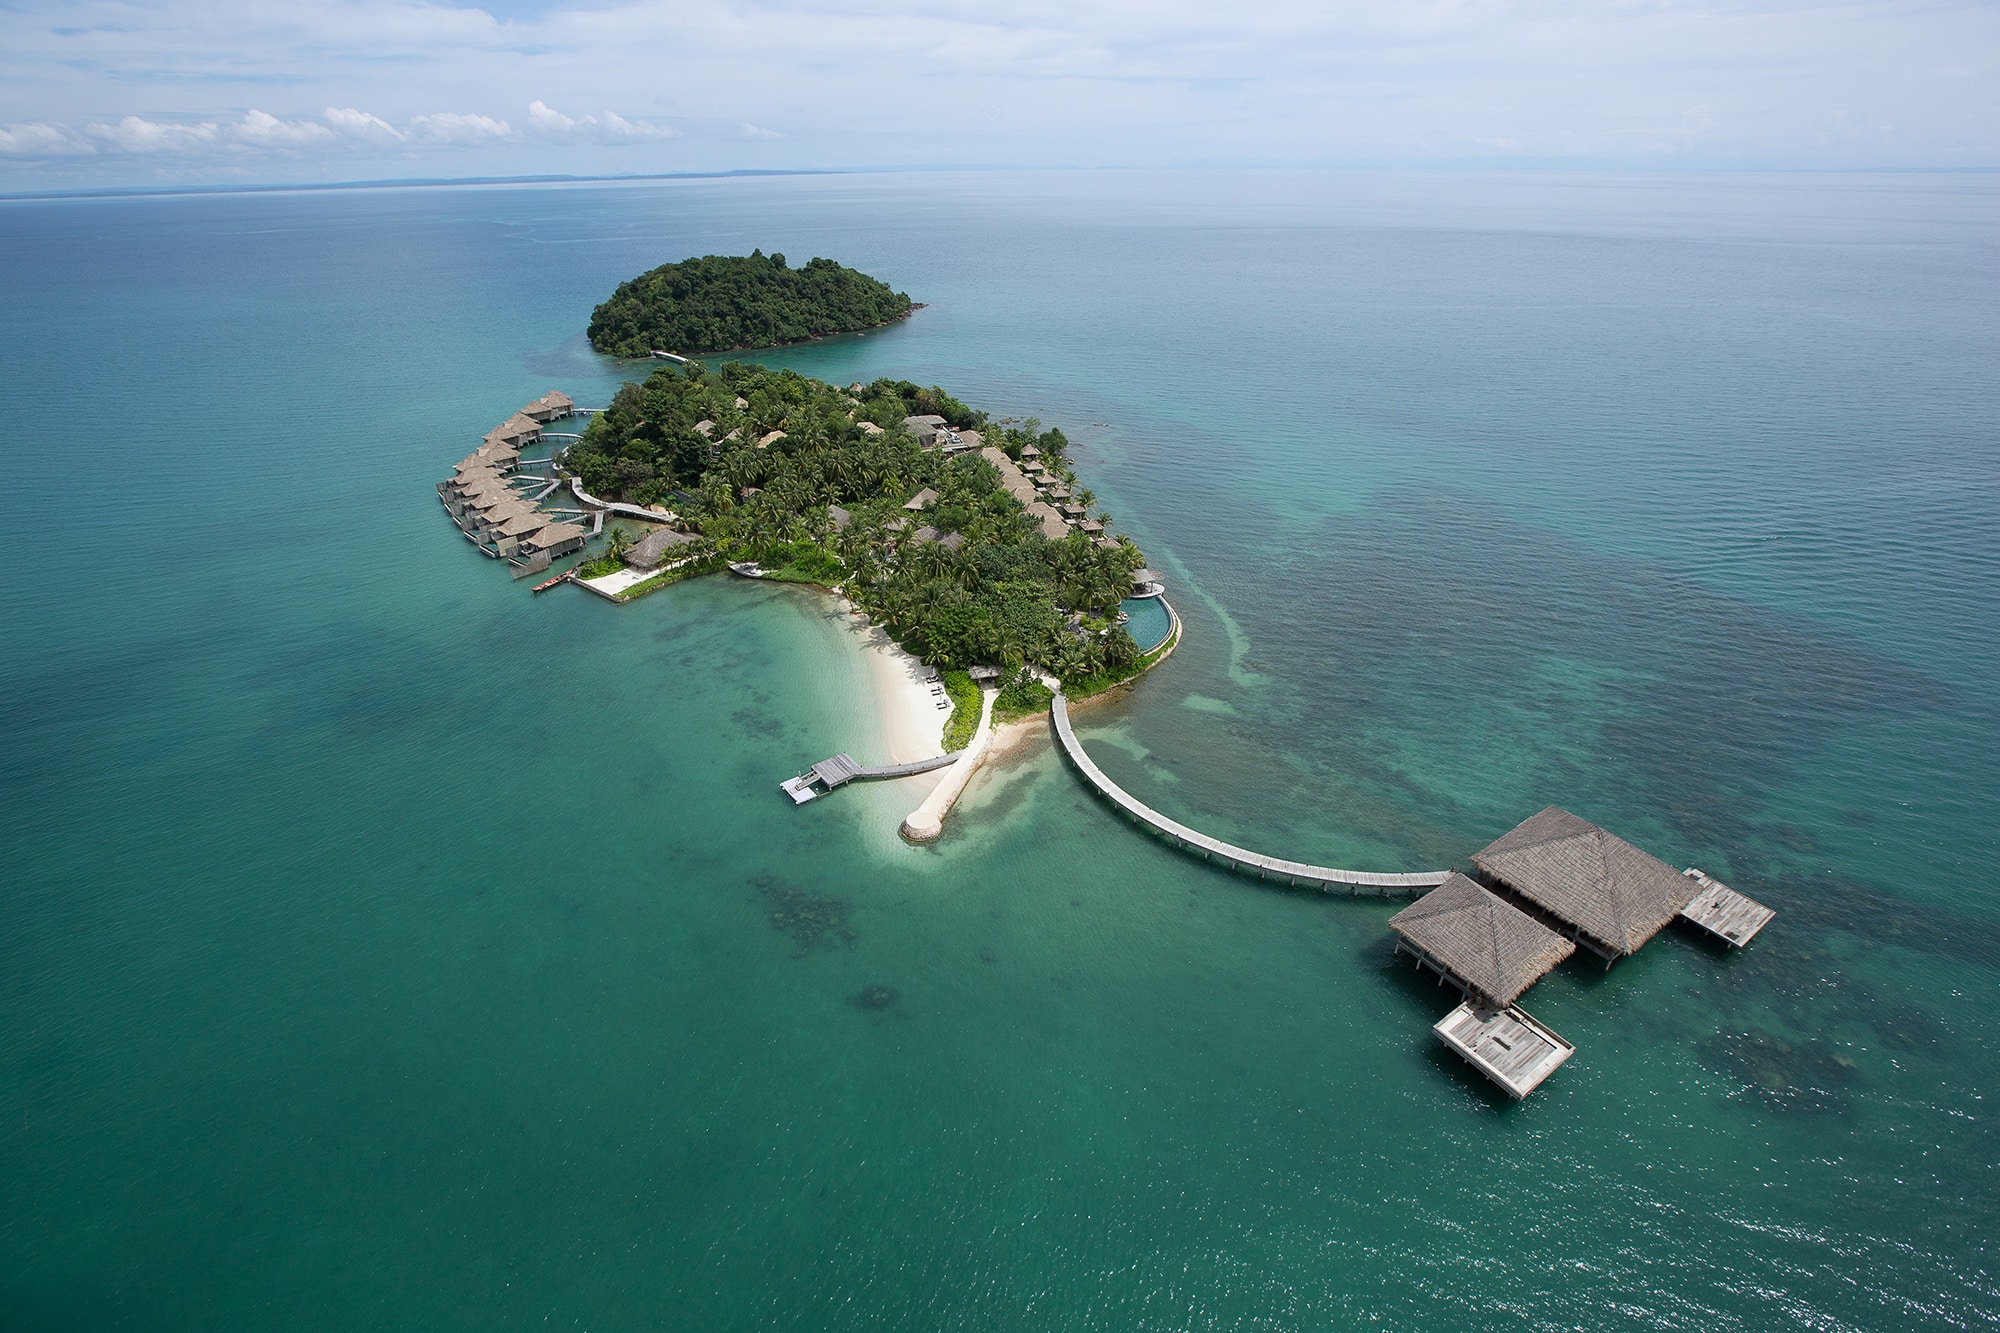 Private Islands to Rent for Romantic Getaways: Song Saa